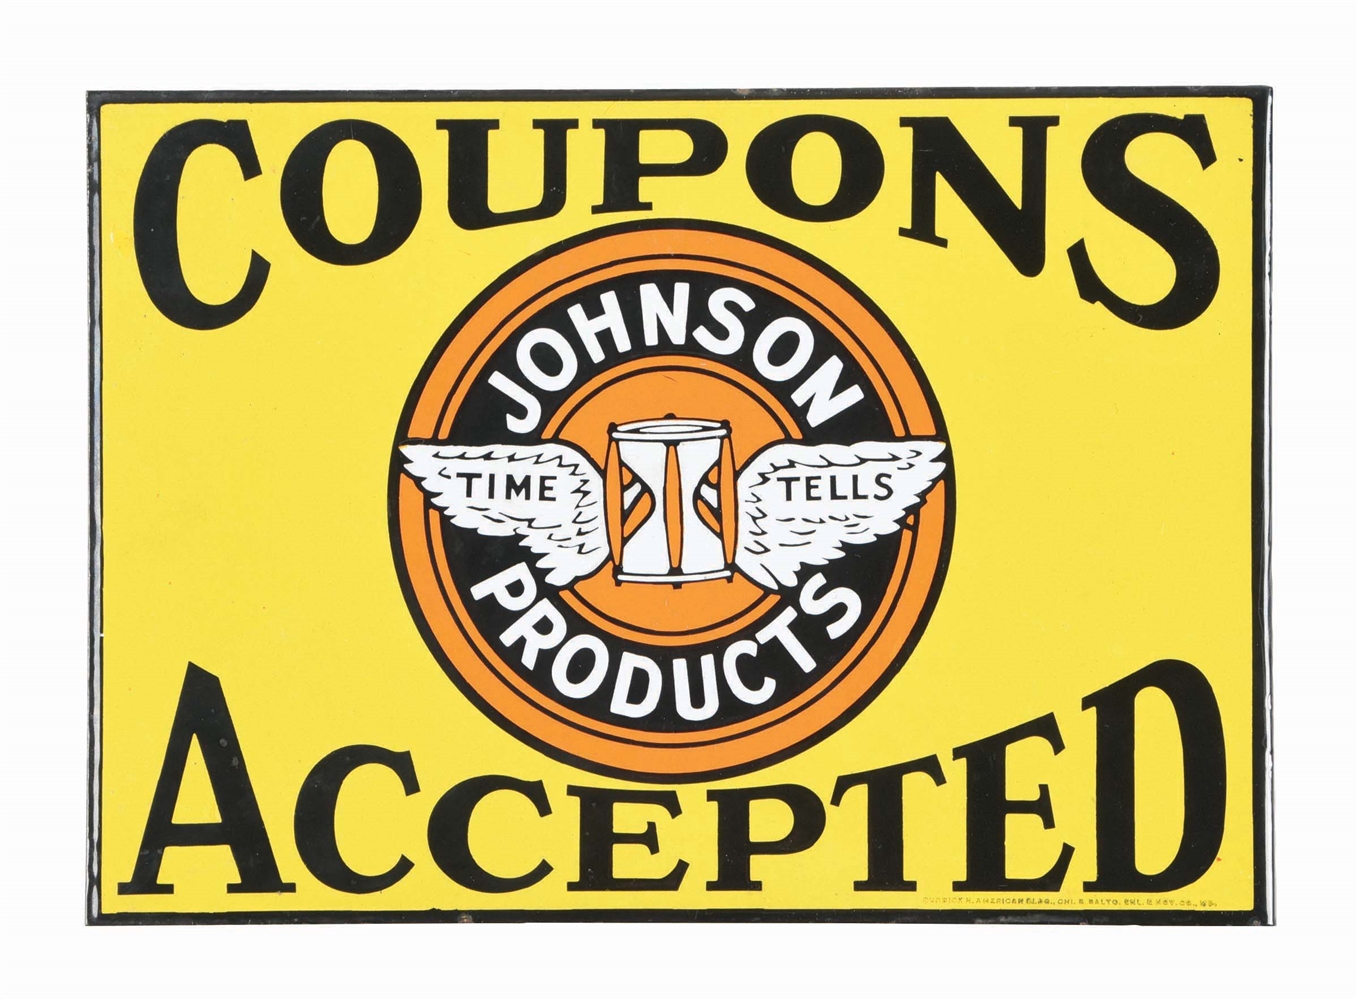 N.O.S. JOHNSON PRODUCTS "COUPONS ACCEPTED" PORCELAIN SERVICE STATION FLANGE SIGN. 